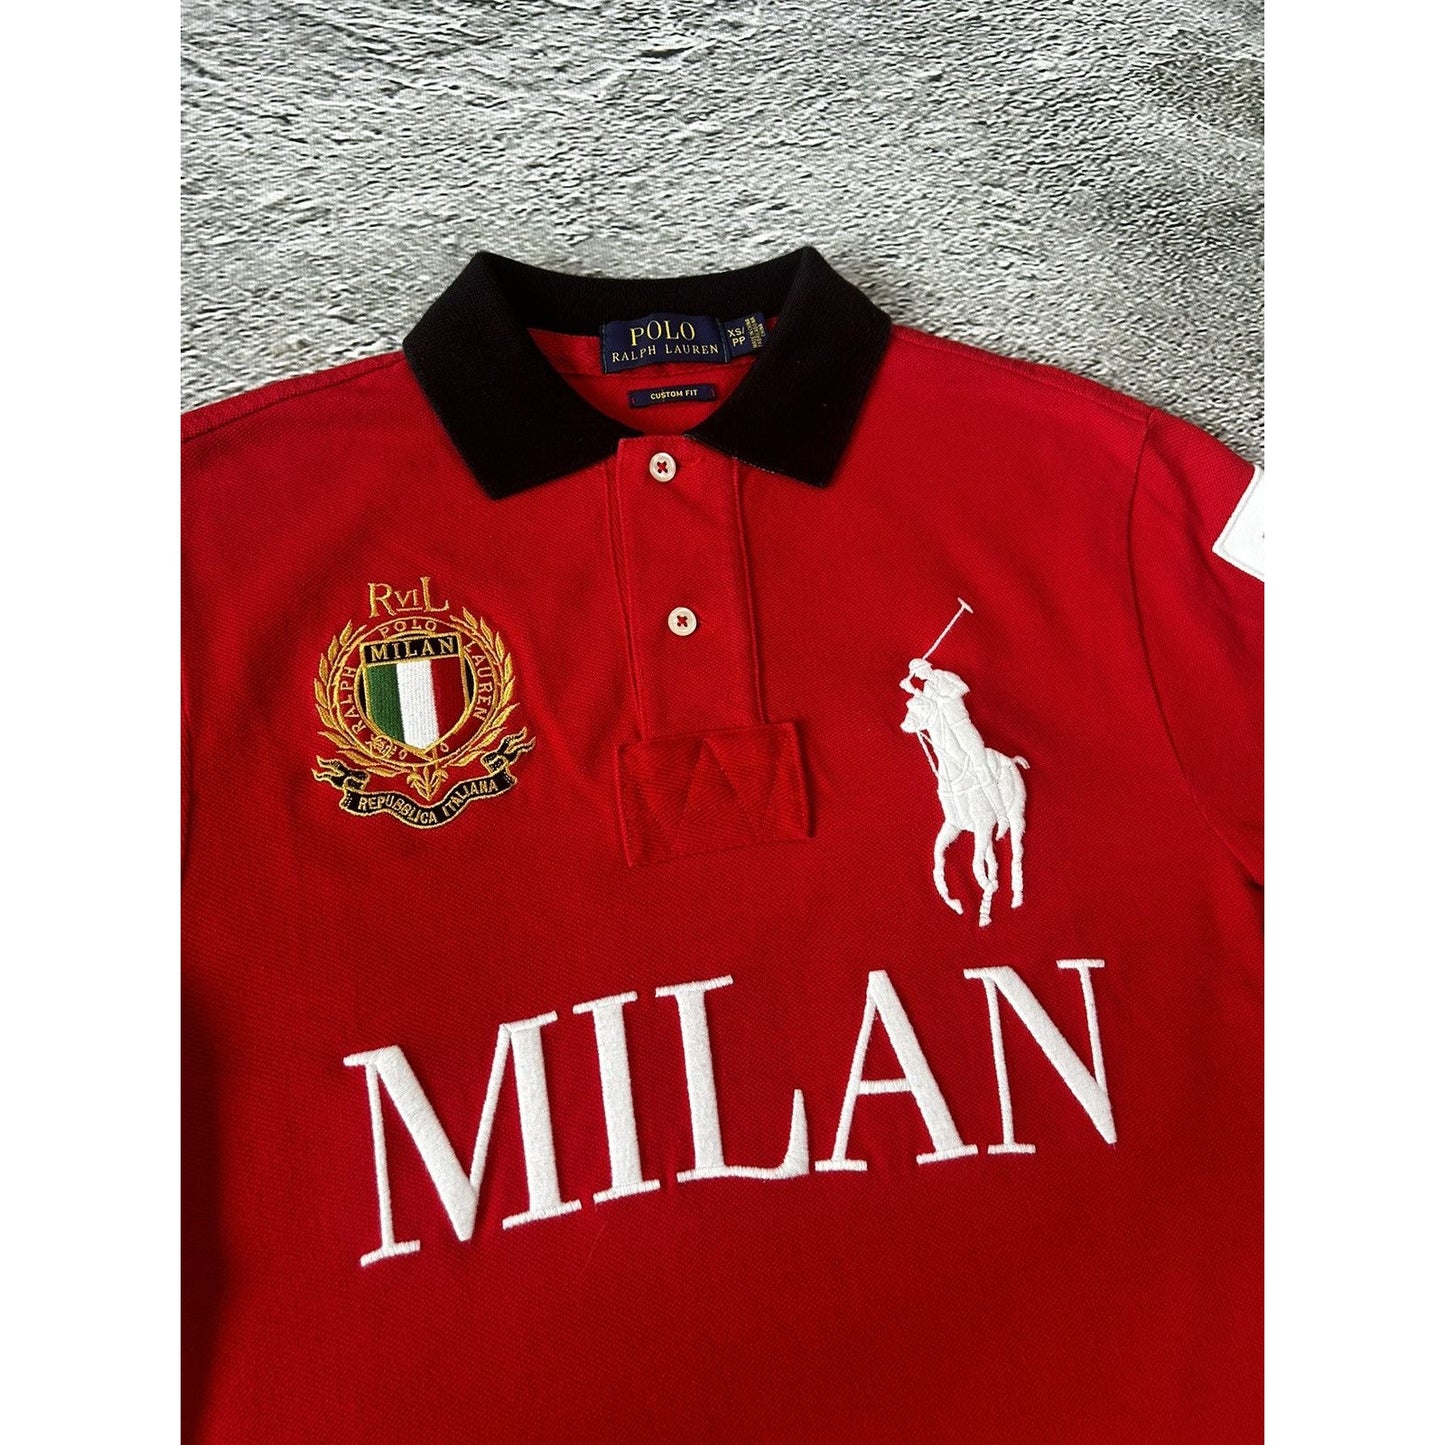 Chief Keef Polo Ralph Lauren Milan Red big pony polo T-shirt